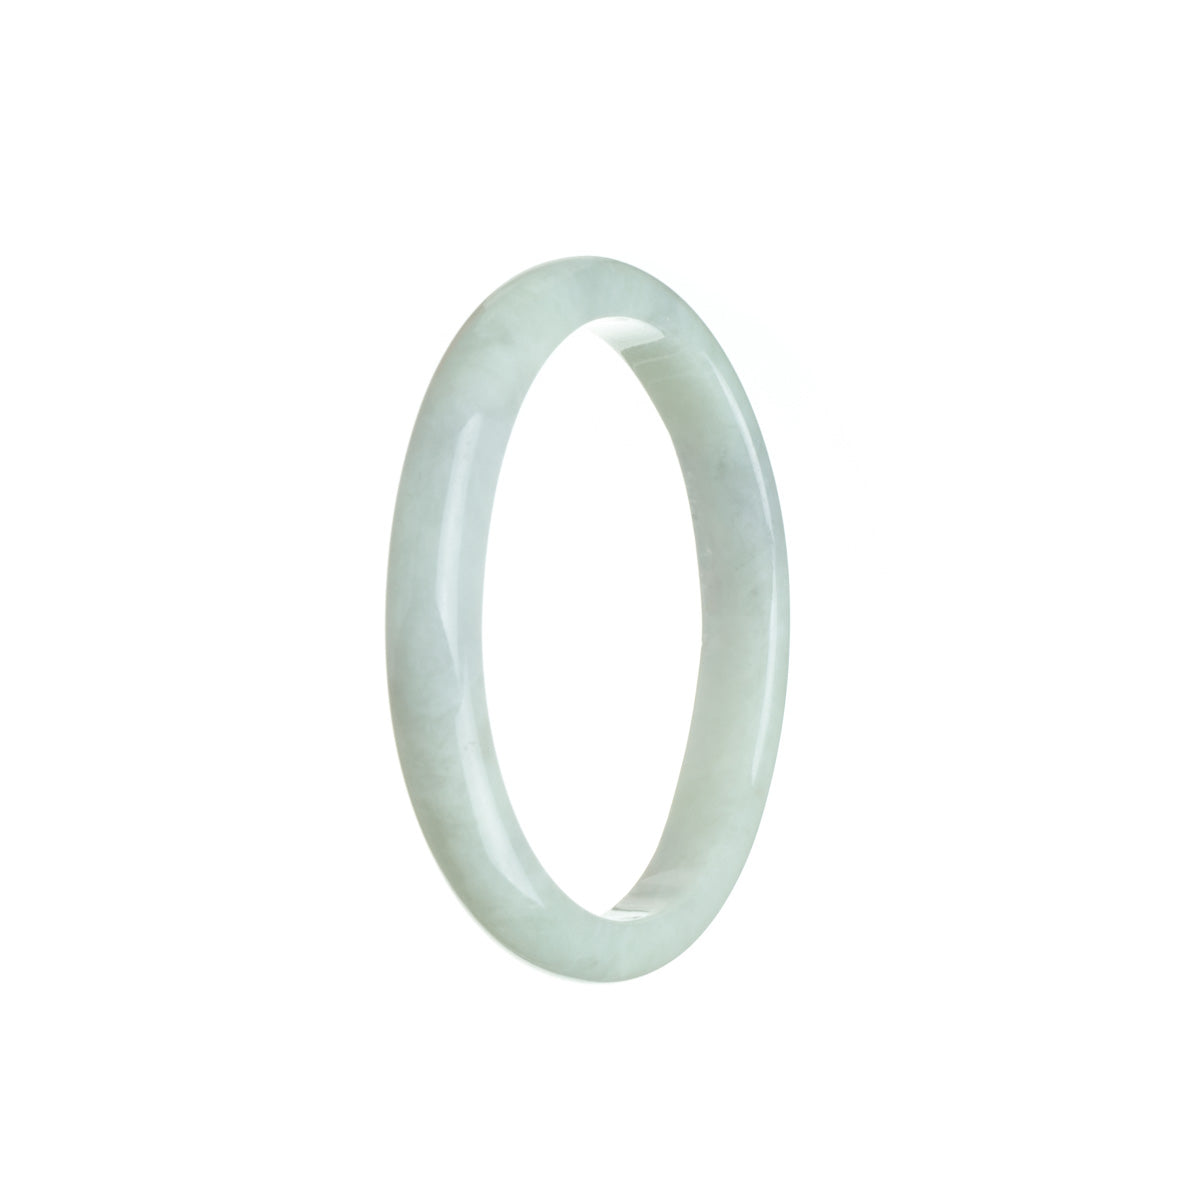 A beautiful oval jade bangle in a pale green shade with subtle lavender undertones.